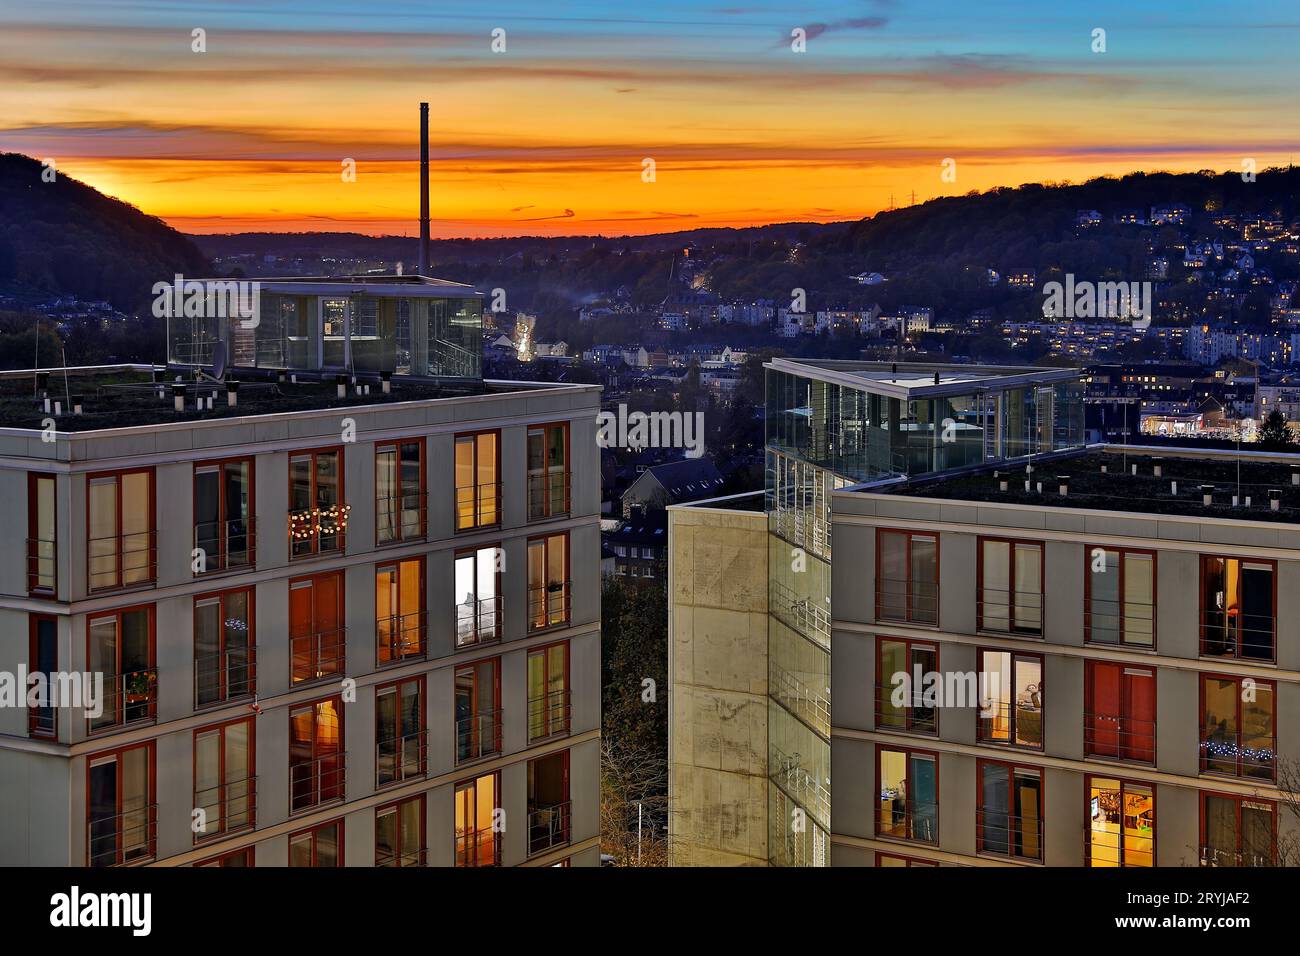 Atmospheric view from the University of Burse at sunset, Wuppertal, Germany, Europe Stock Photo